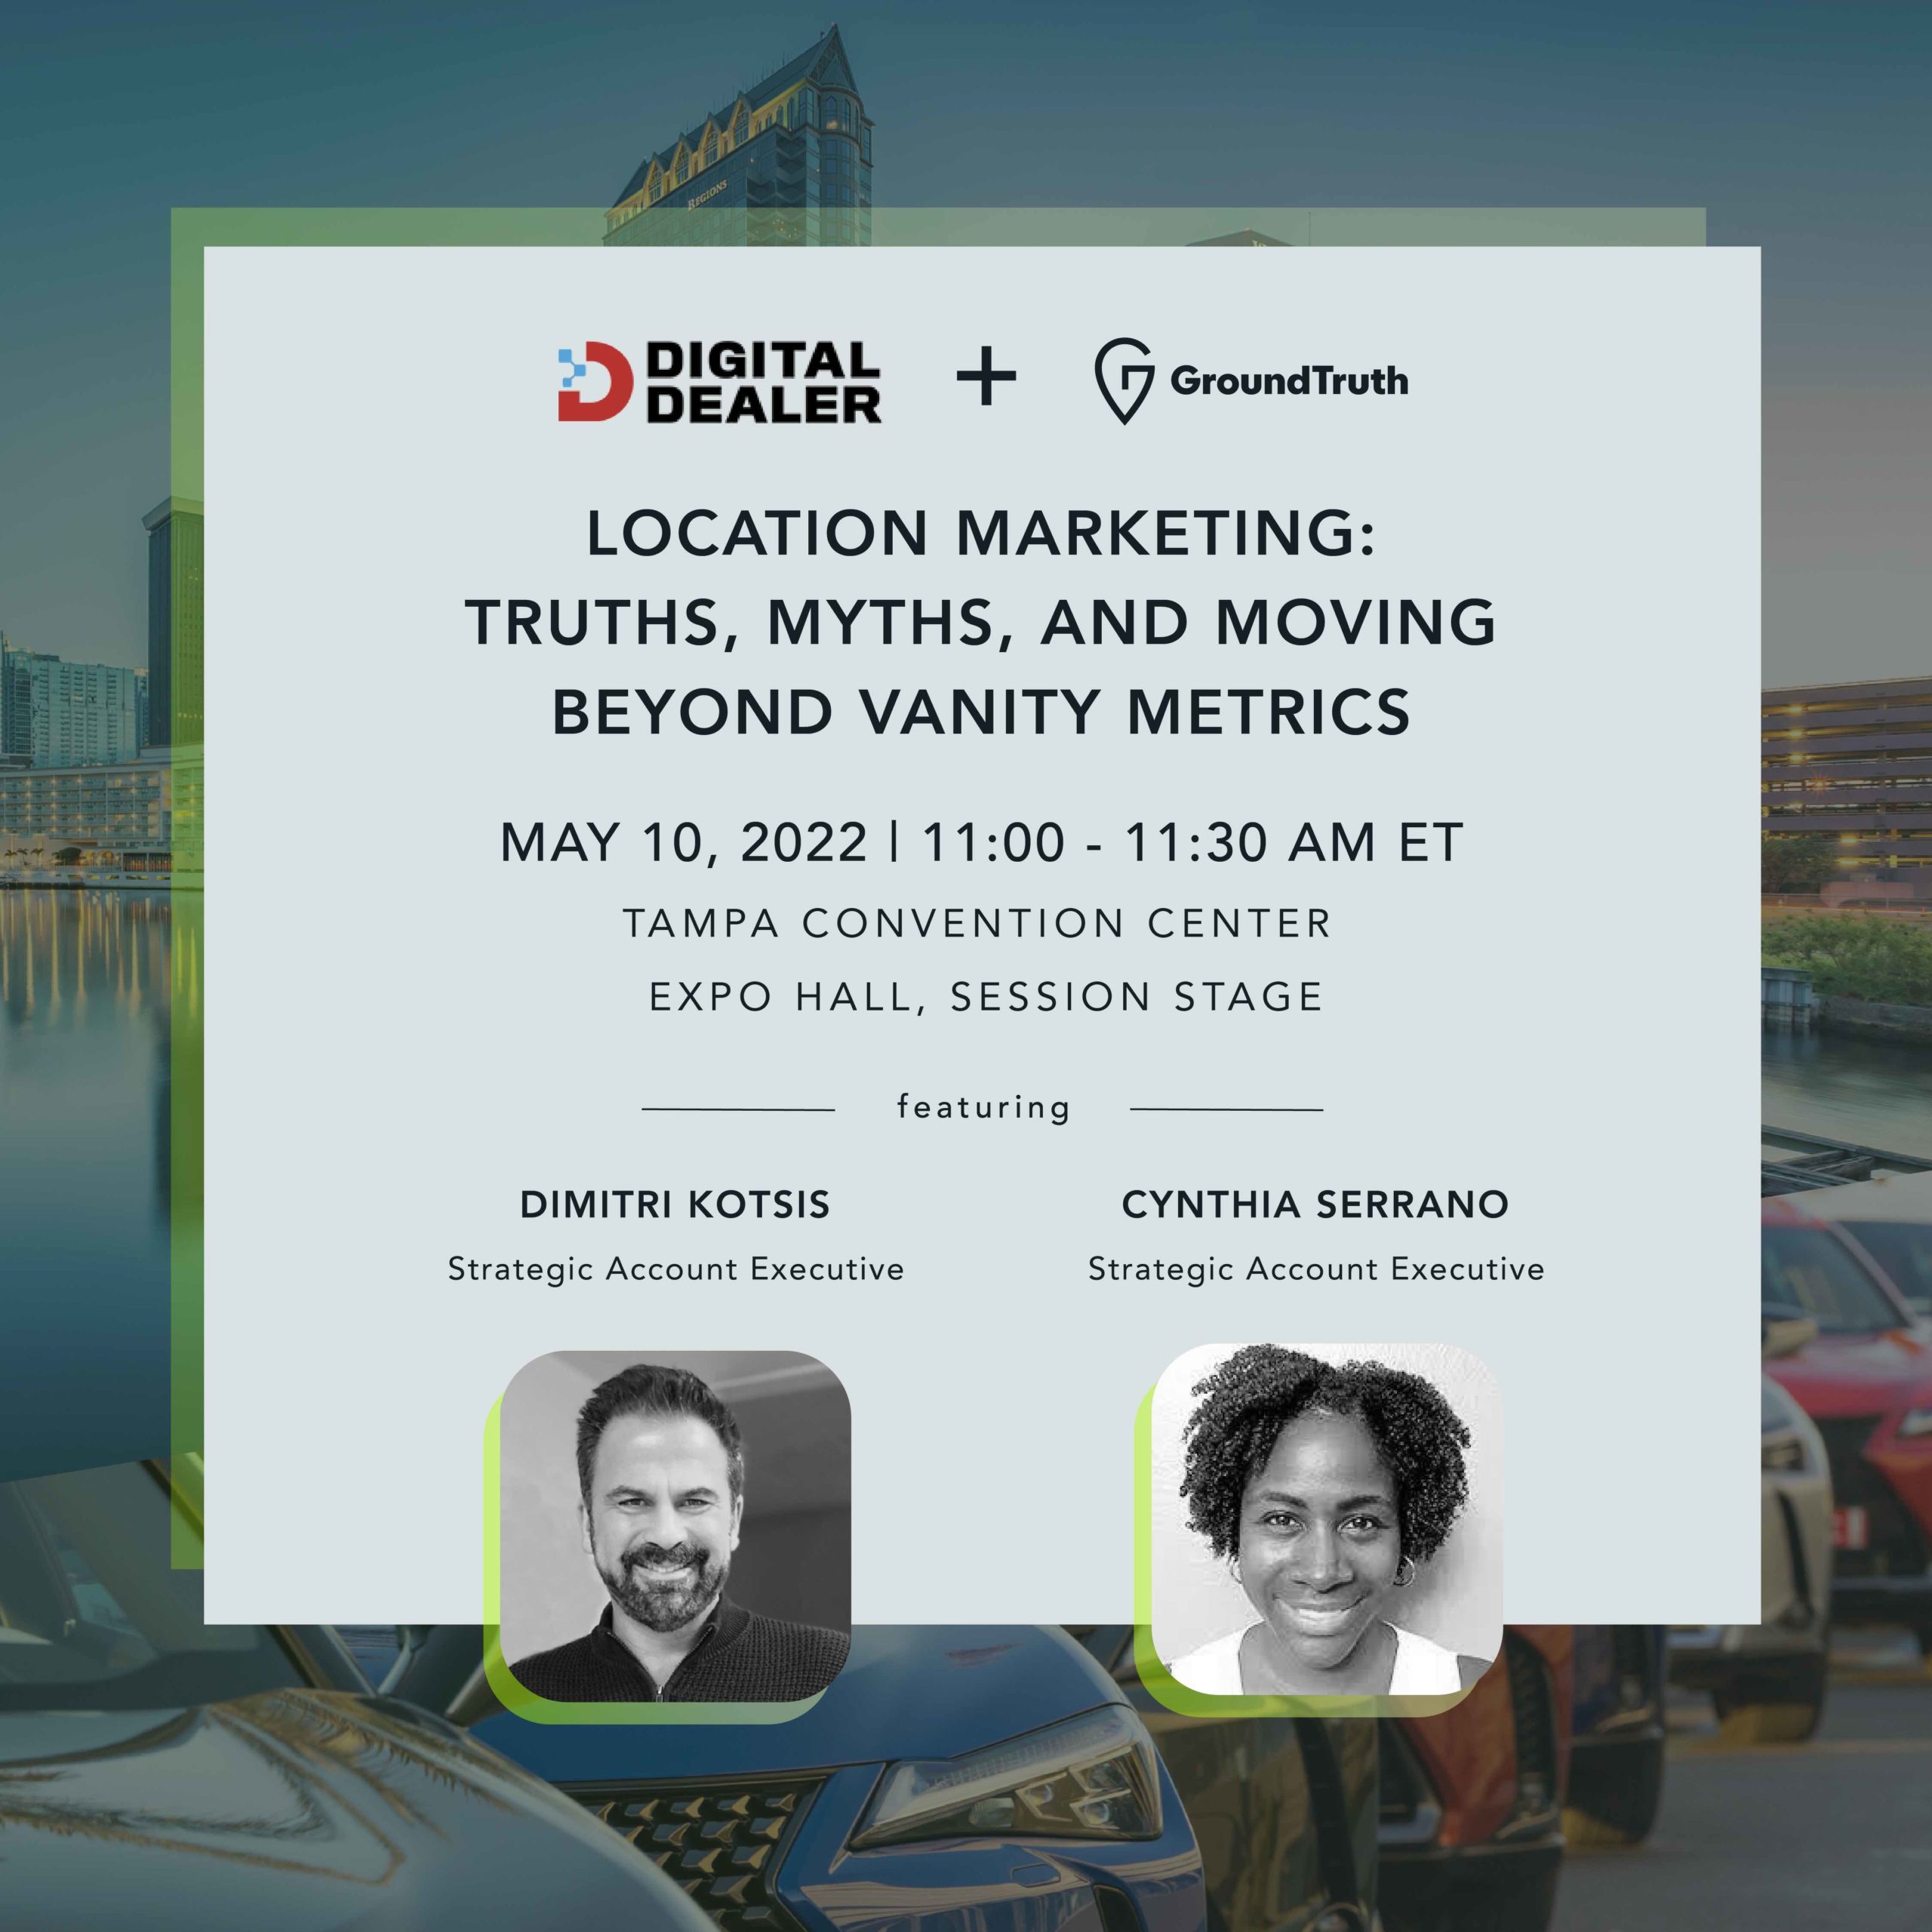 GroundTruth experts take the stage to talk about location marketing